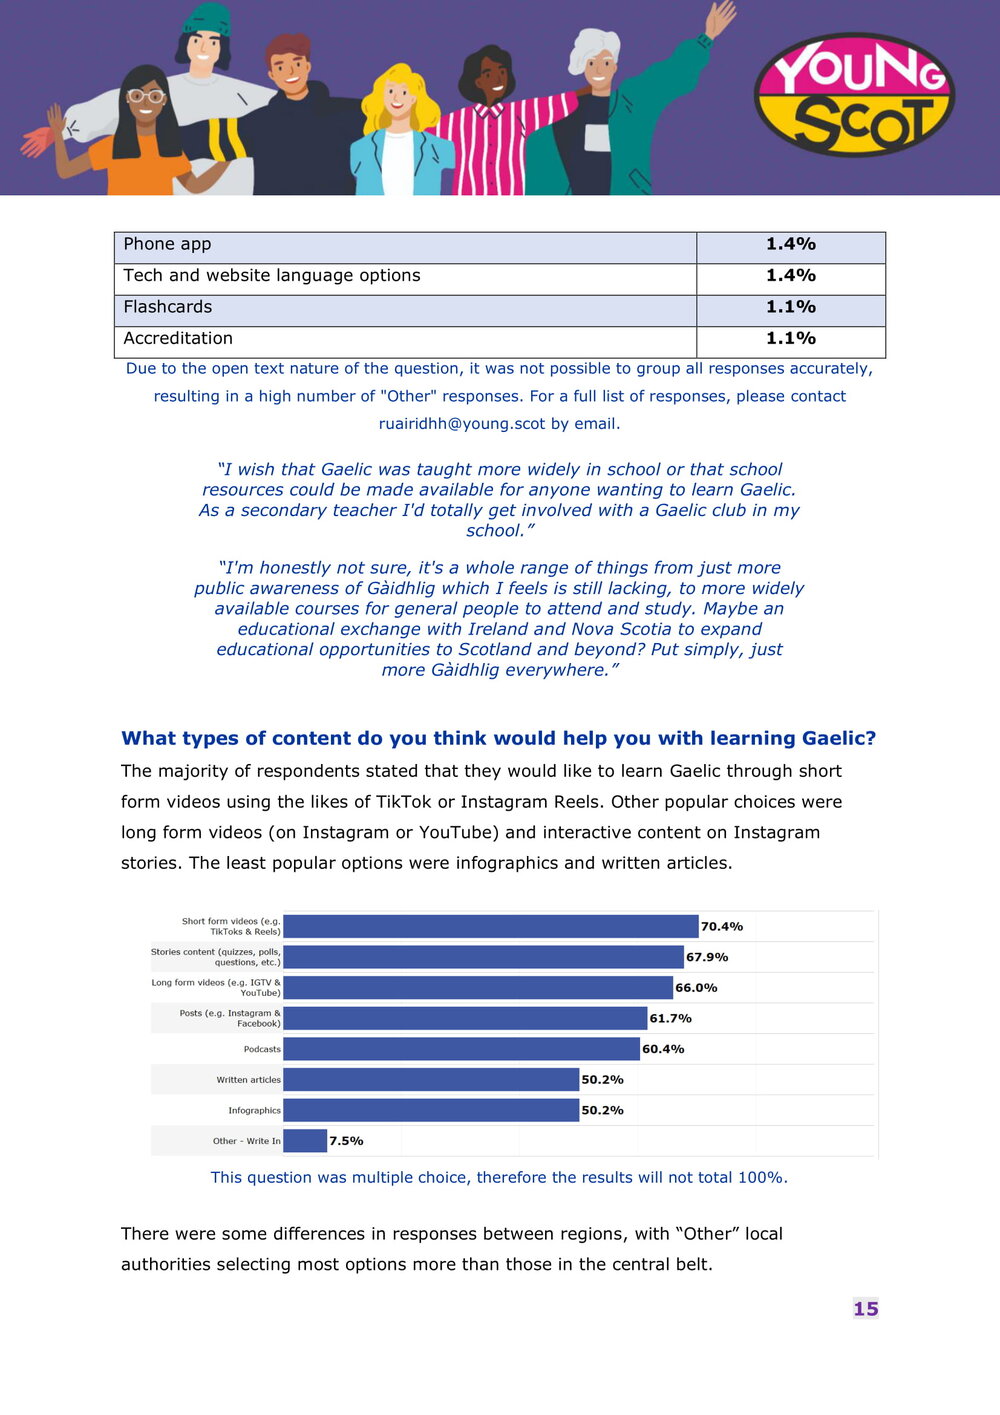 Engaging with Gaelic Online - Survey Results Report-16.jpg